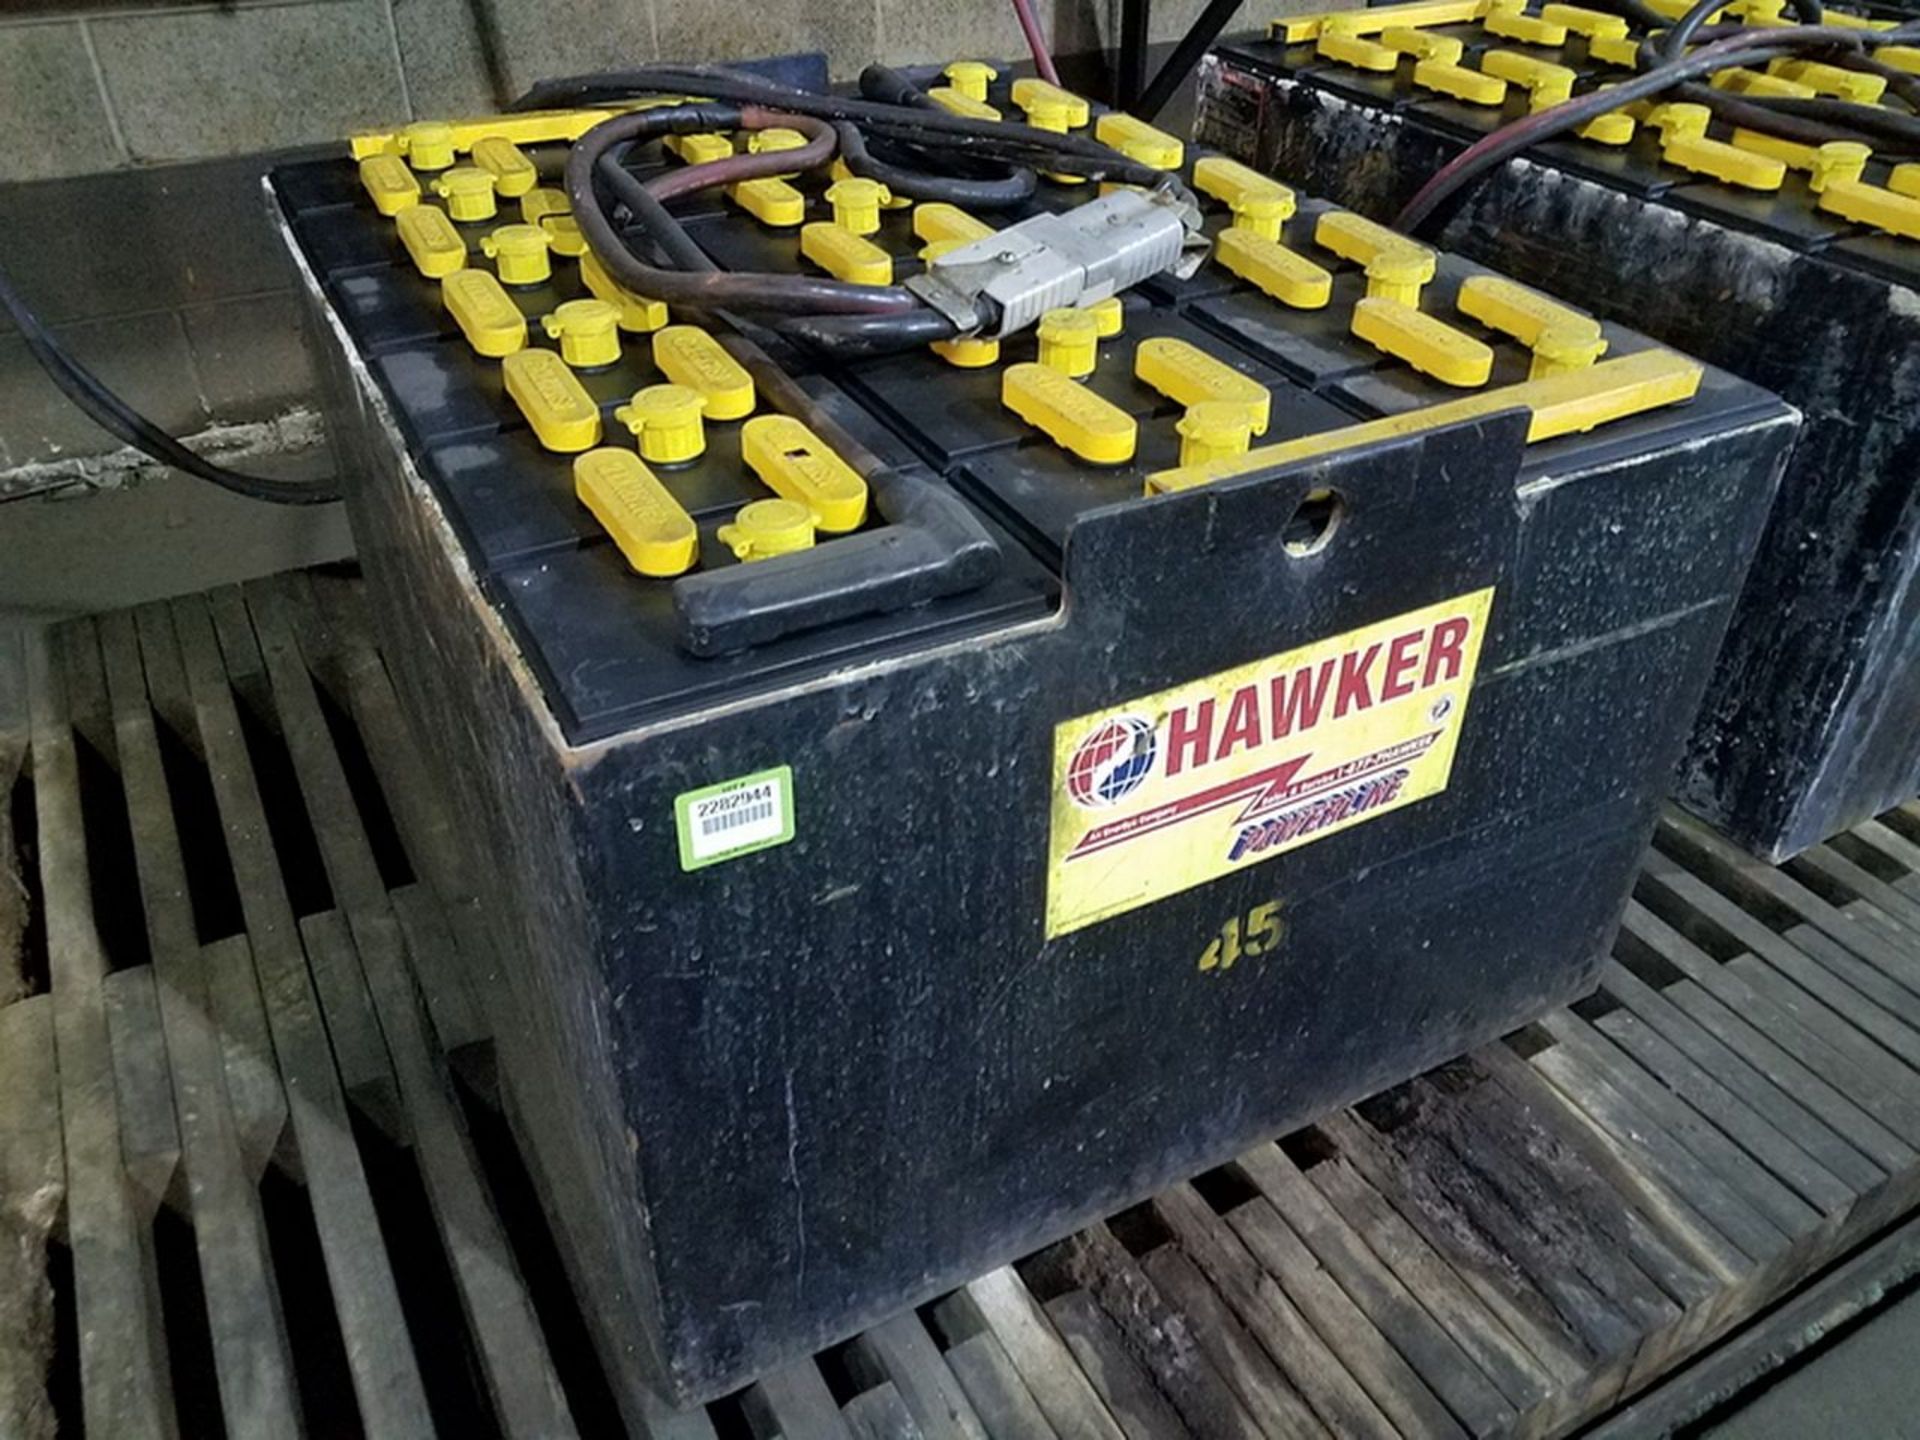 Hawker Powersource Model EO-583 36-Volt Spare Forklift Battery, type 018085F27, hour capacity 1105